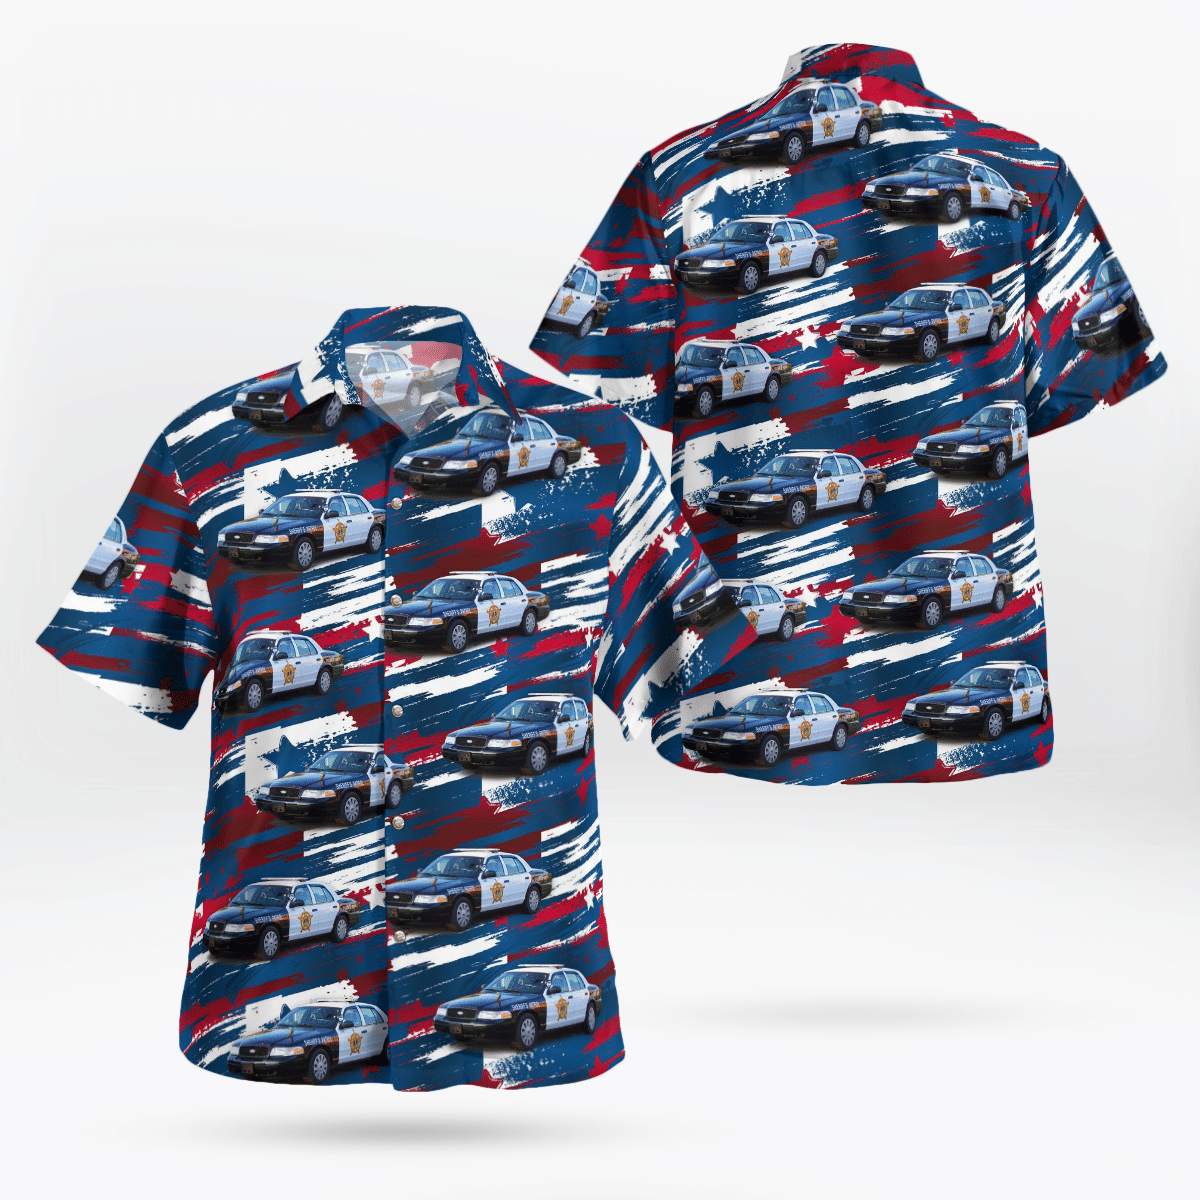 Consider getting these Hawaiian Shirt for your friends 41